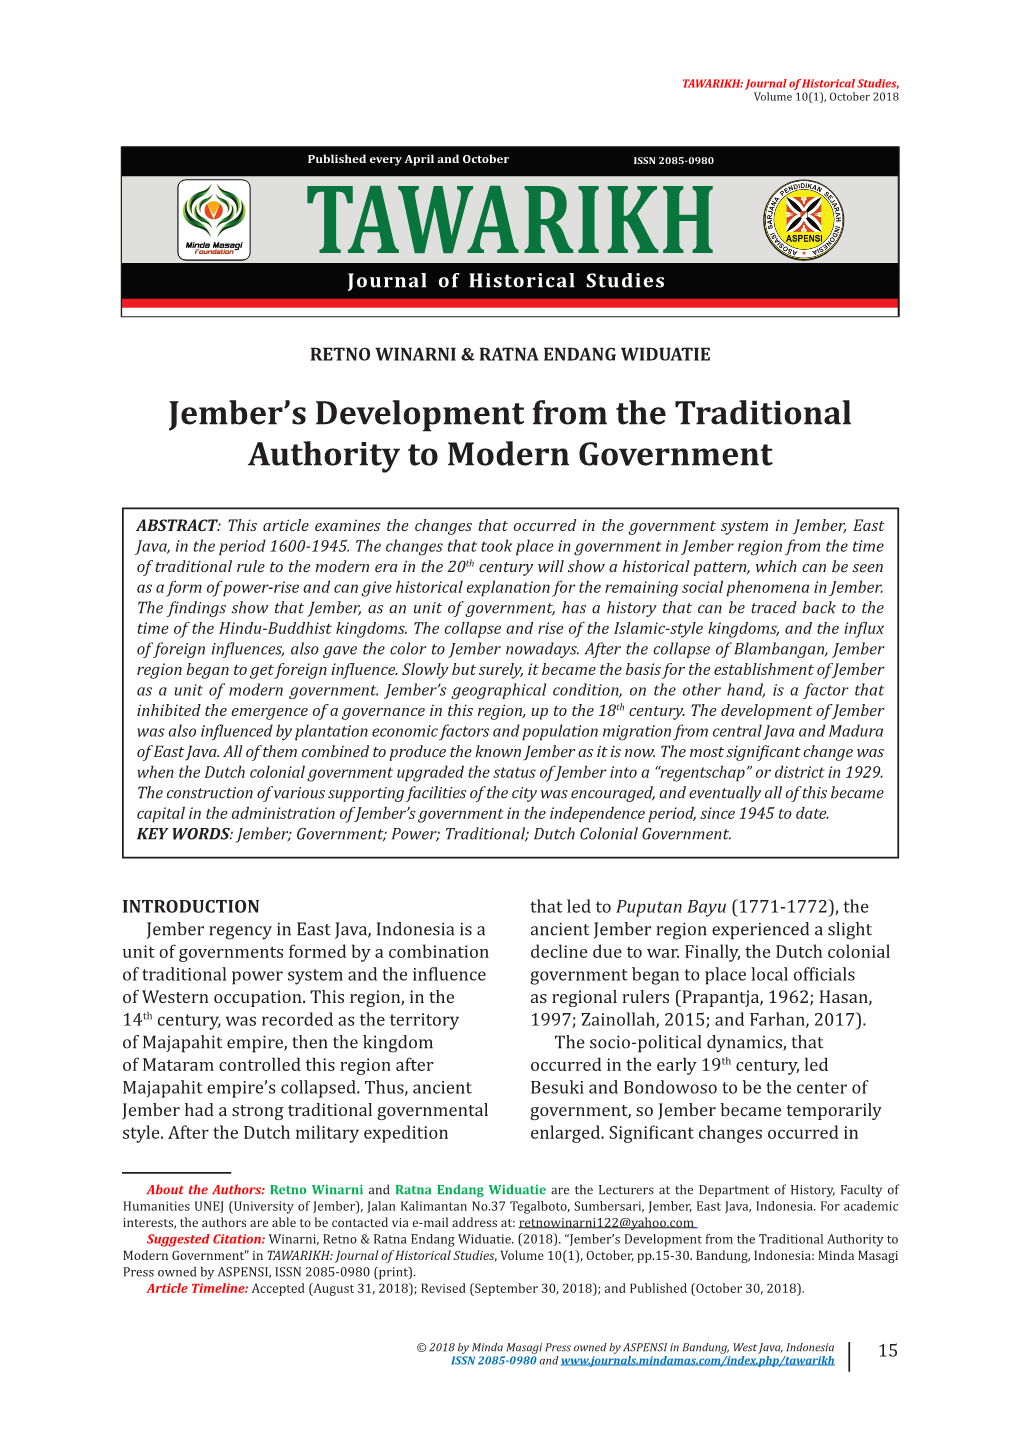 Jember's Development from the Traditional Authority to Modern